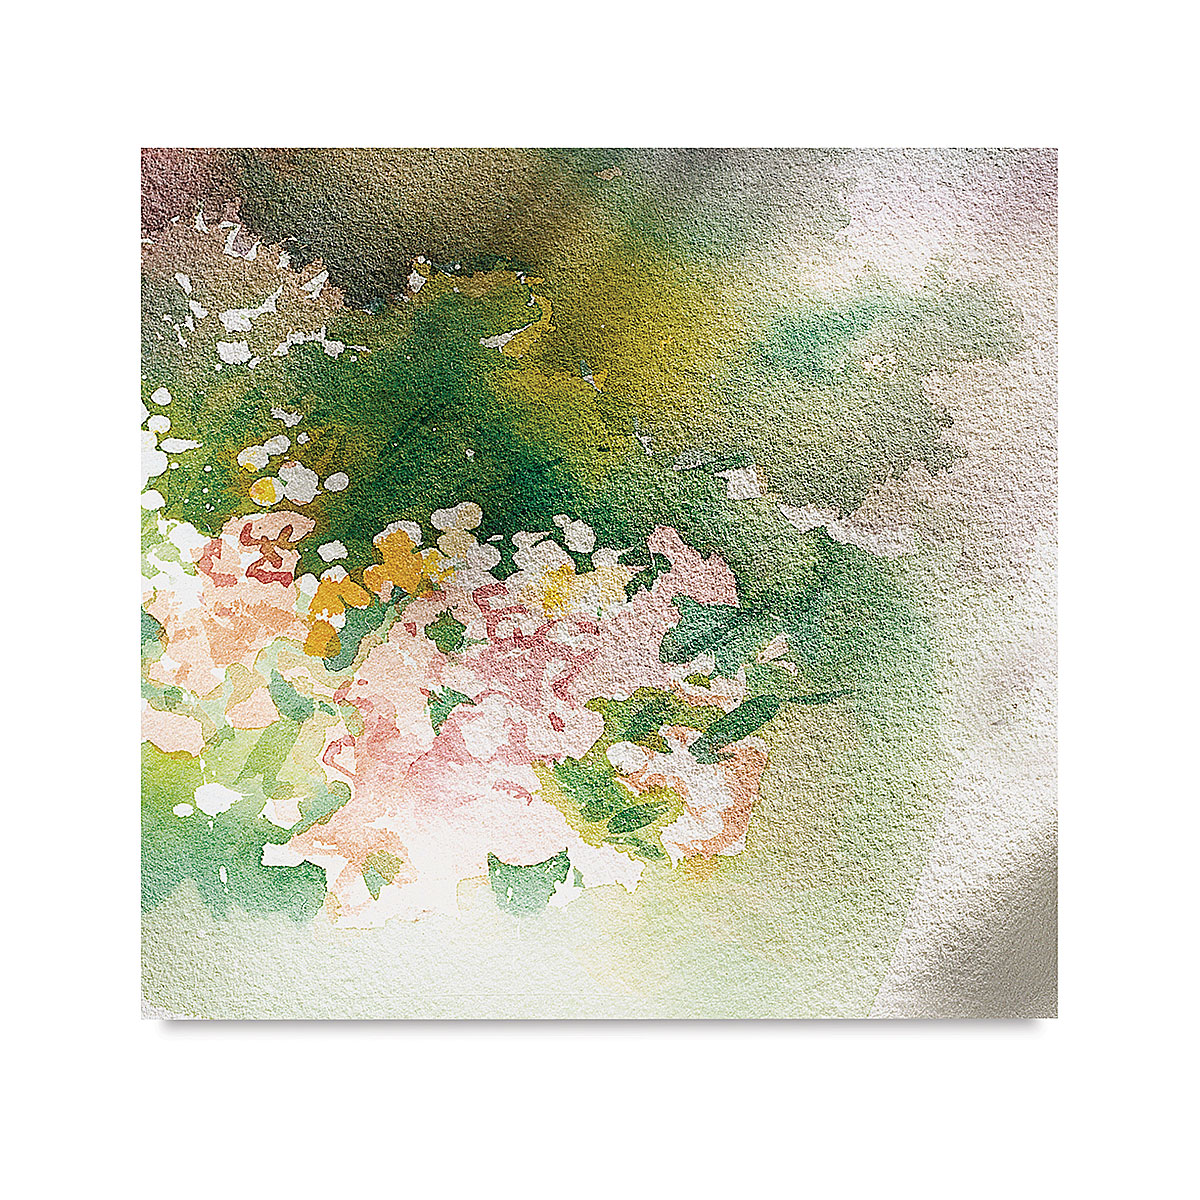 Arches Watercolor Pad 11.69x16.53-inch Natural White 100% Cotton Paper - 12  Sheet Arches Watercolor Paper 140 lb Cold Press Pad - Arches Art Paper for